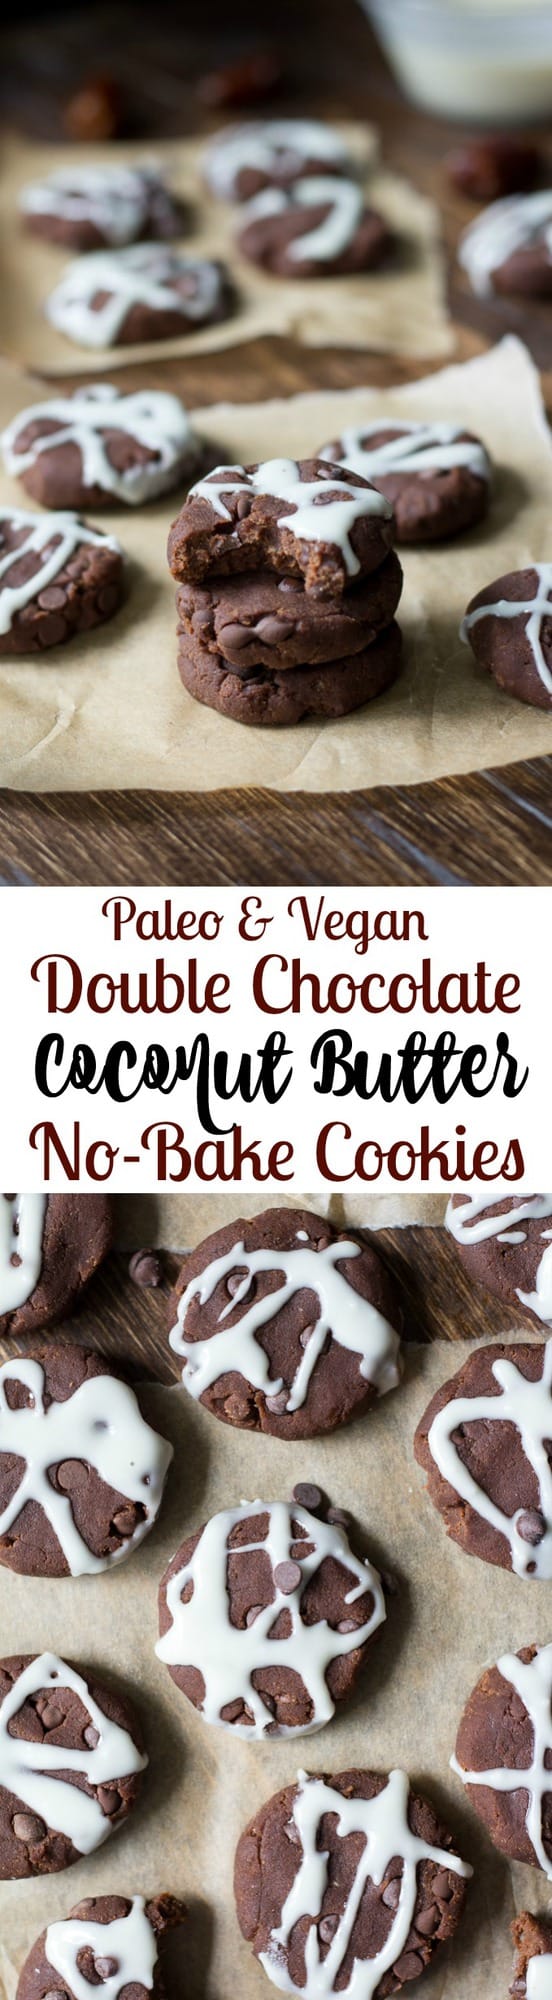 No Bake Chocolate Coconut Butter cookies - paleo and vegan, fruit sweetened, no refined sugar, healthy and kid friendly!